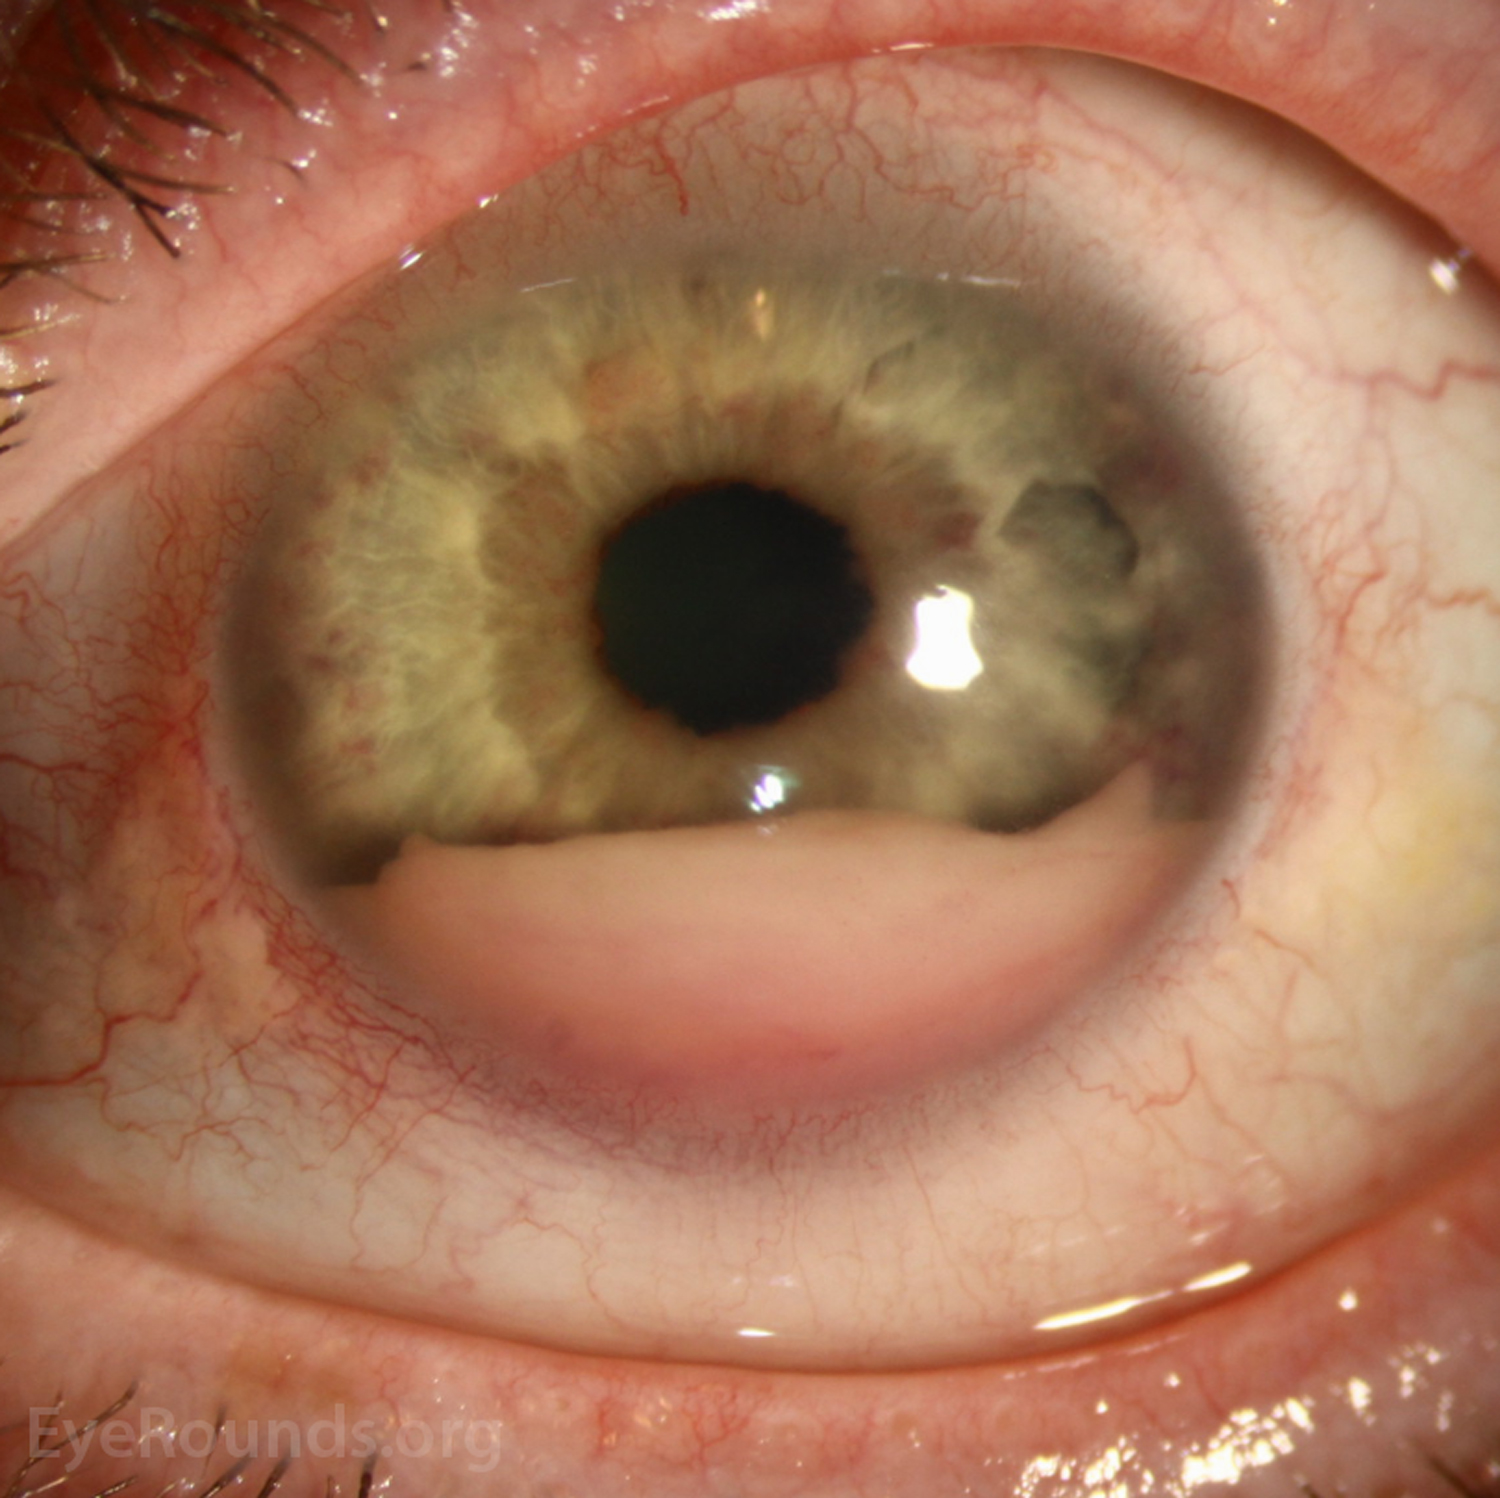  Slit lamp photograph of the left eye shows mild injection, clear cornea, and presence of a 3.5 mm blood-tinged pseudohypopyon in the anterior chamber